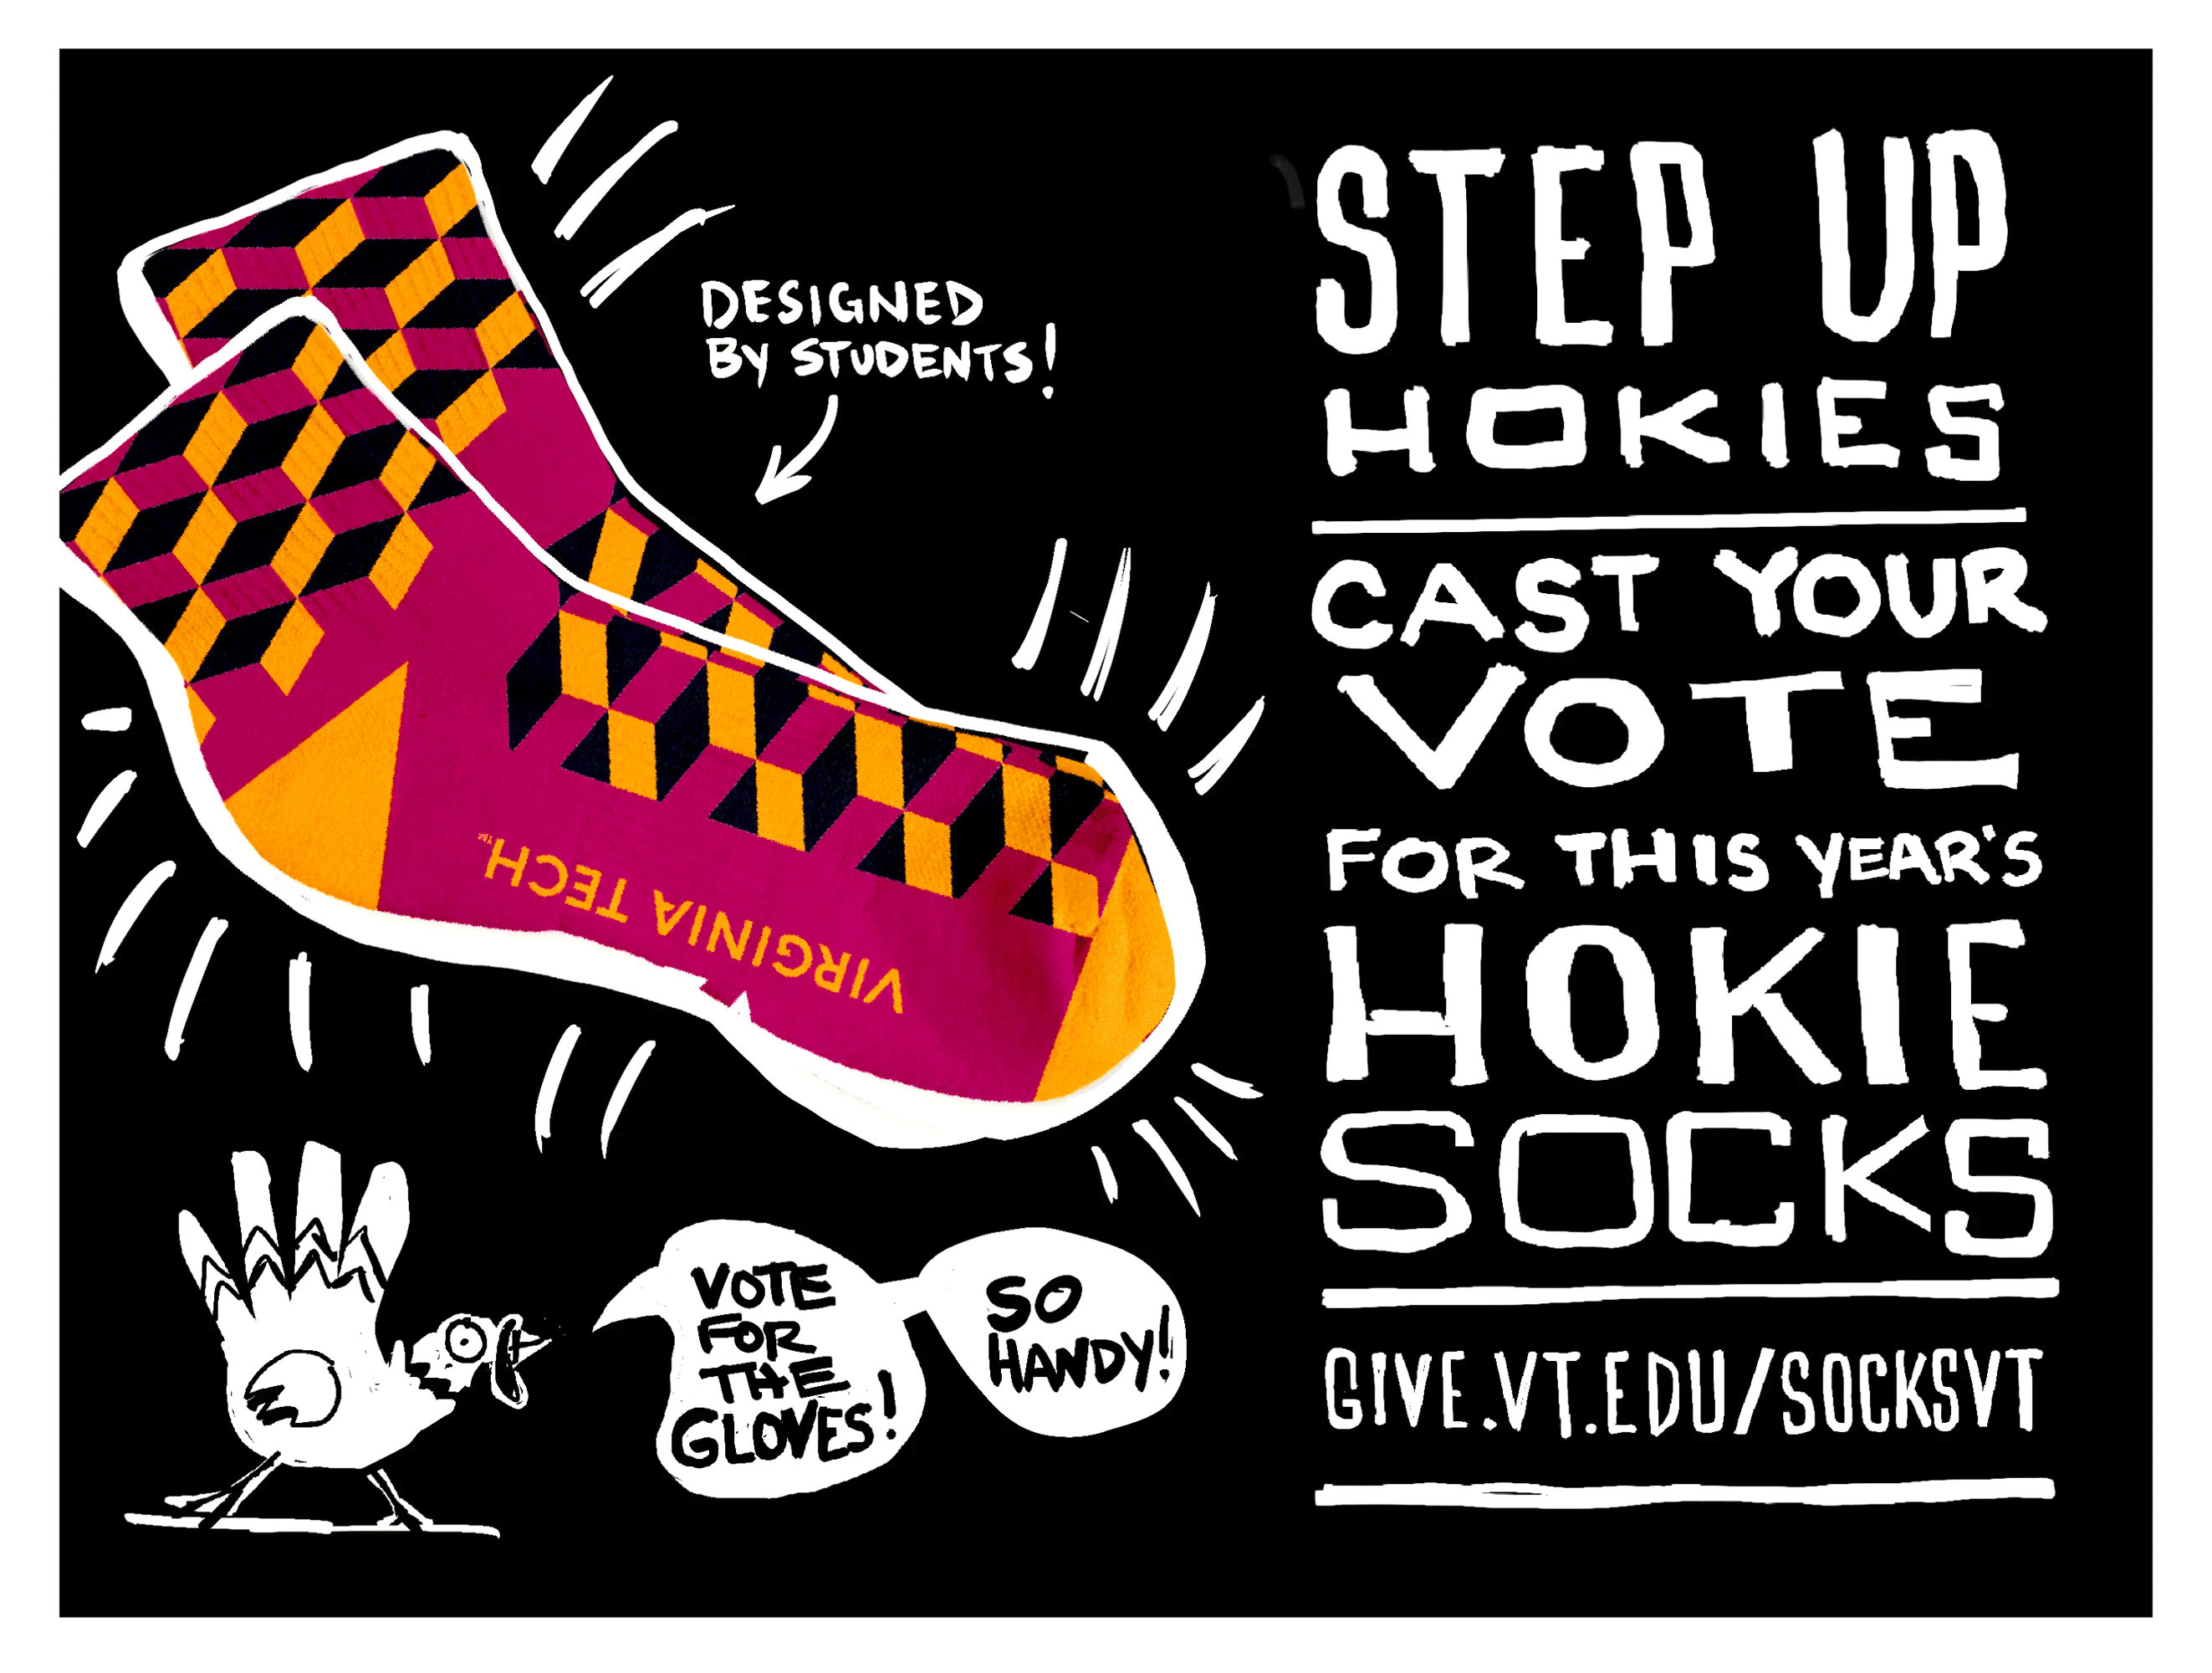 Digital sketch of a call to action to vote for sock designs